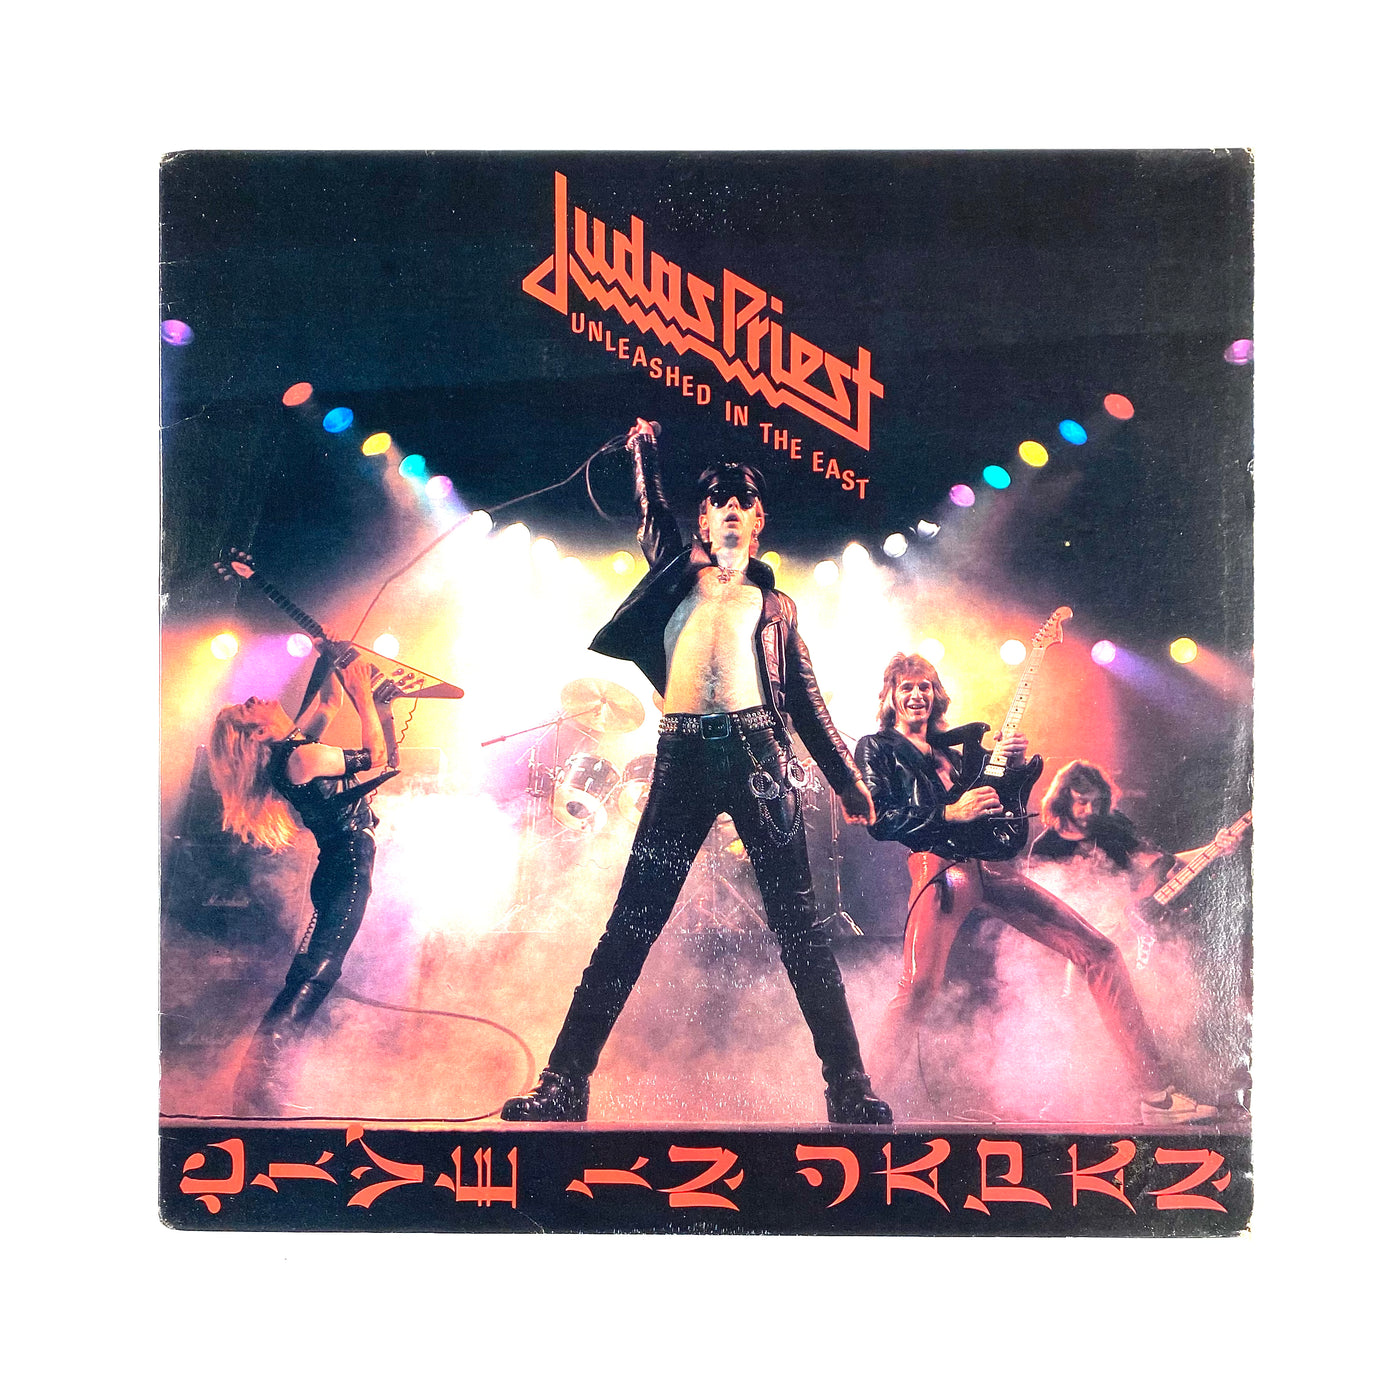 Judas Priest - Unleashed In The East (Live In Japan)